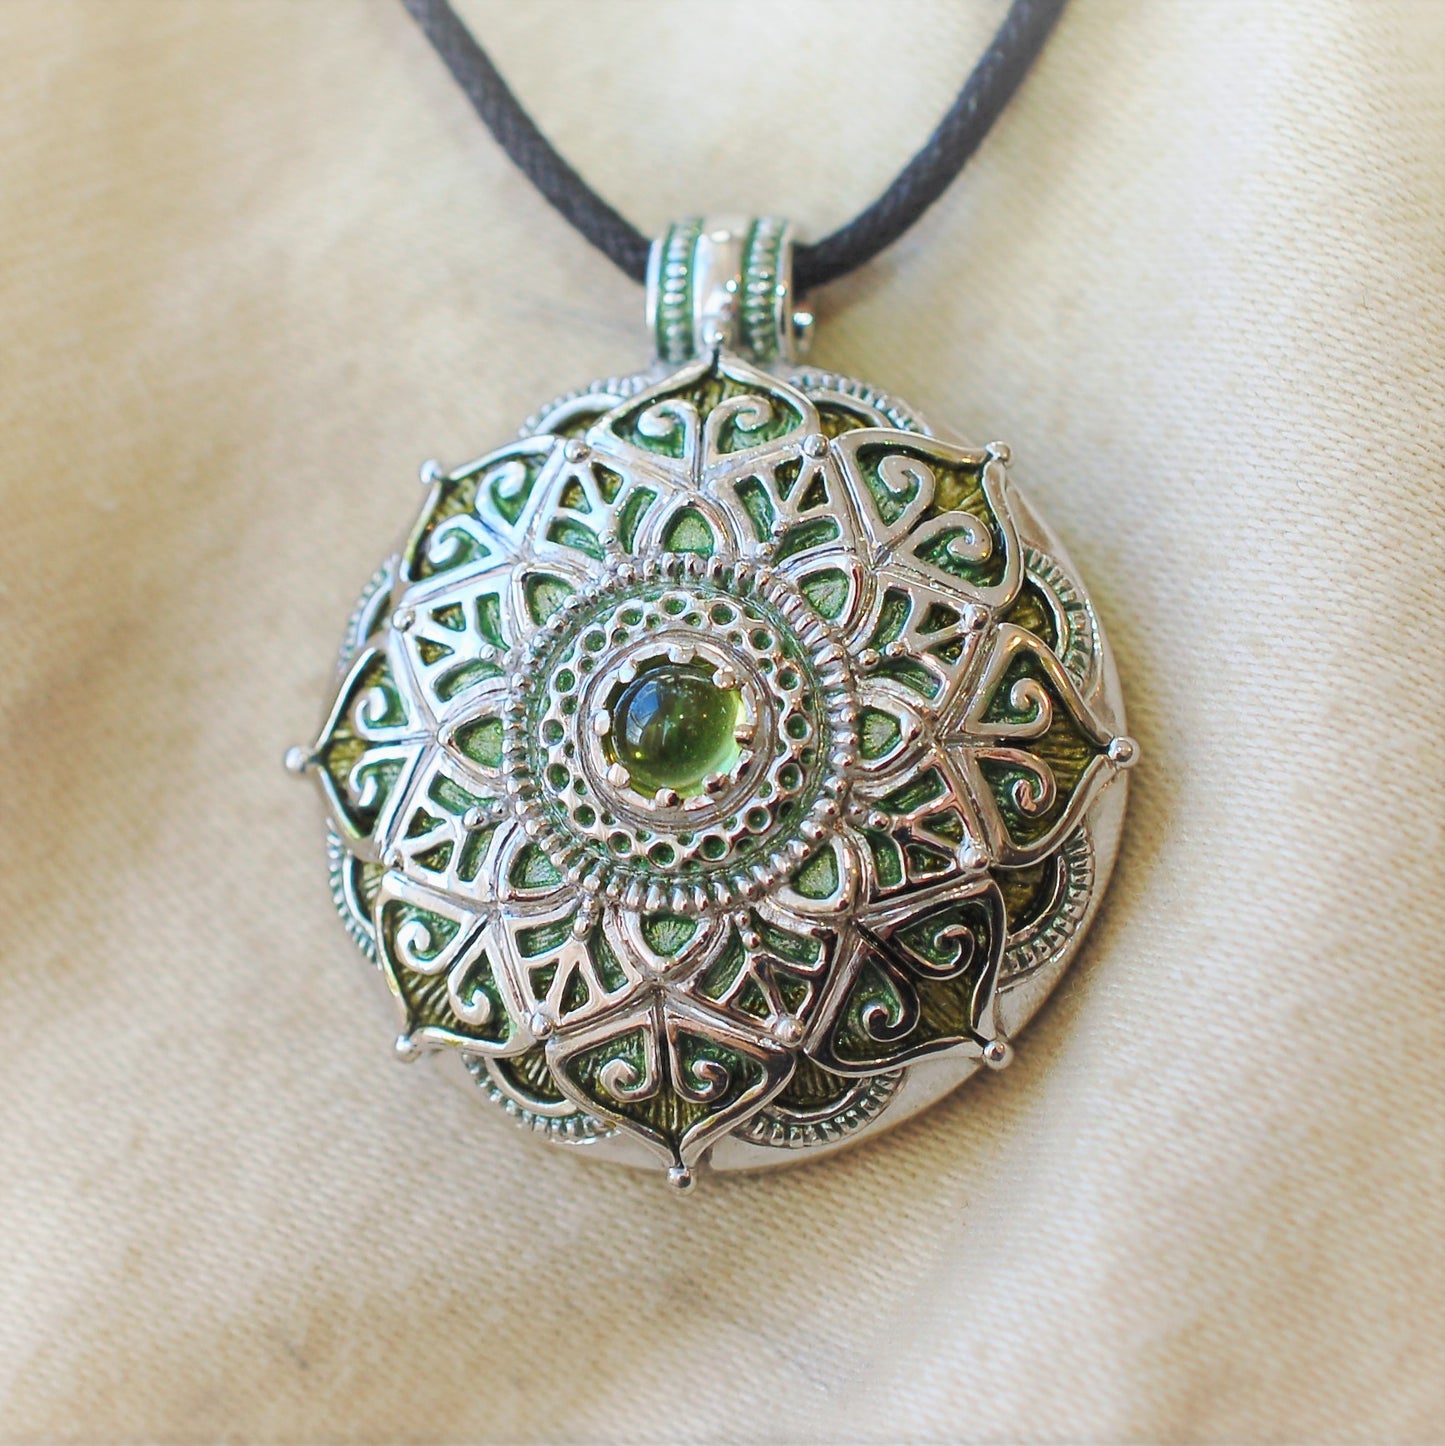 Mandala necklace, sterling silver and peridot necklace, green patina, meditation, yoga or mindfulness amulet. *This piece is finished and ready to be shipped* © Adrian Ashley